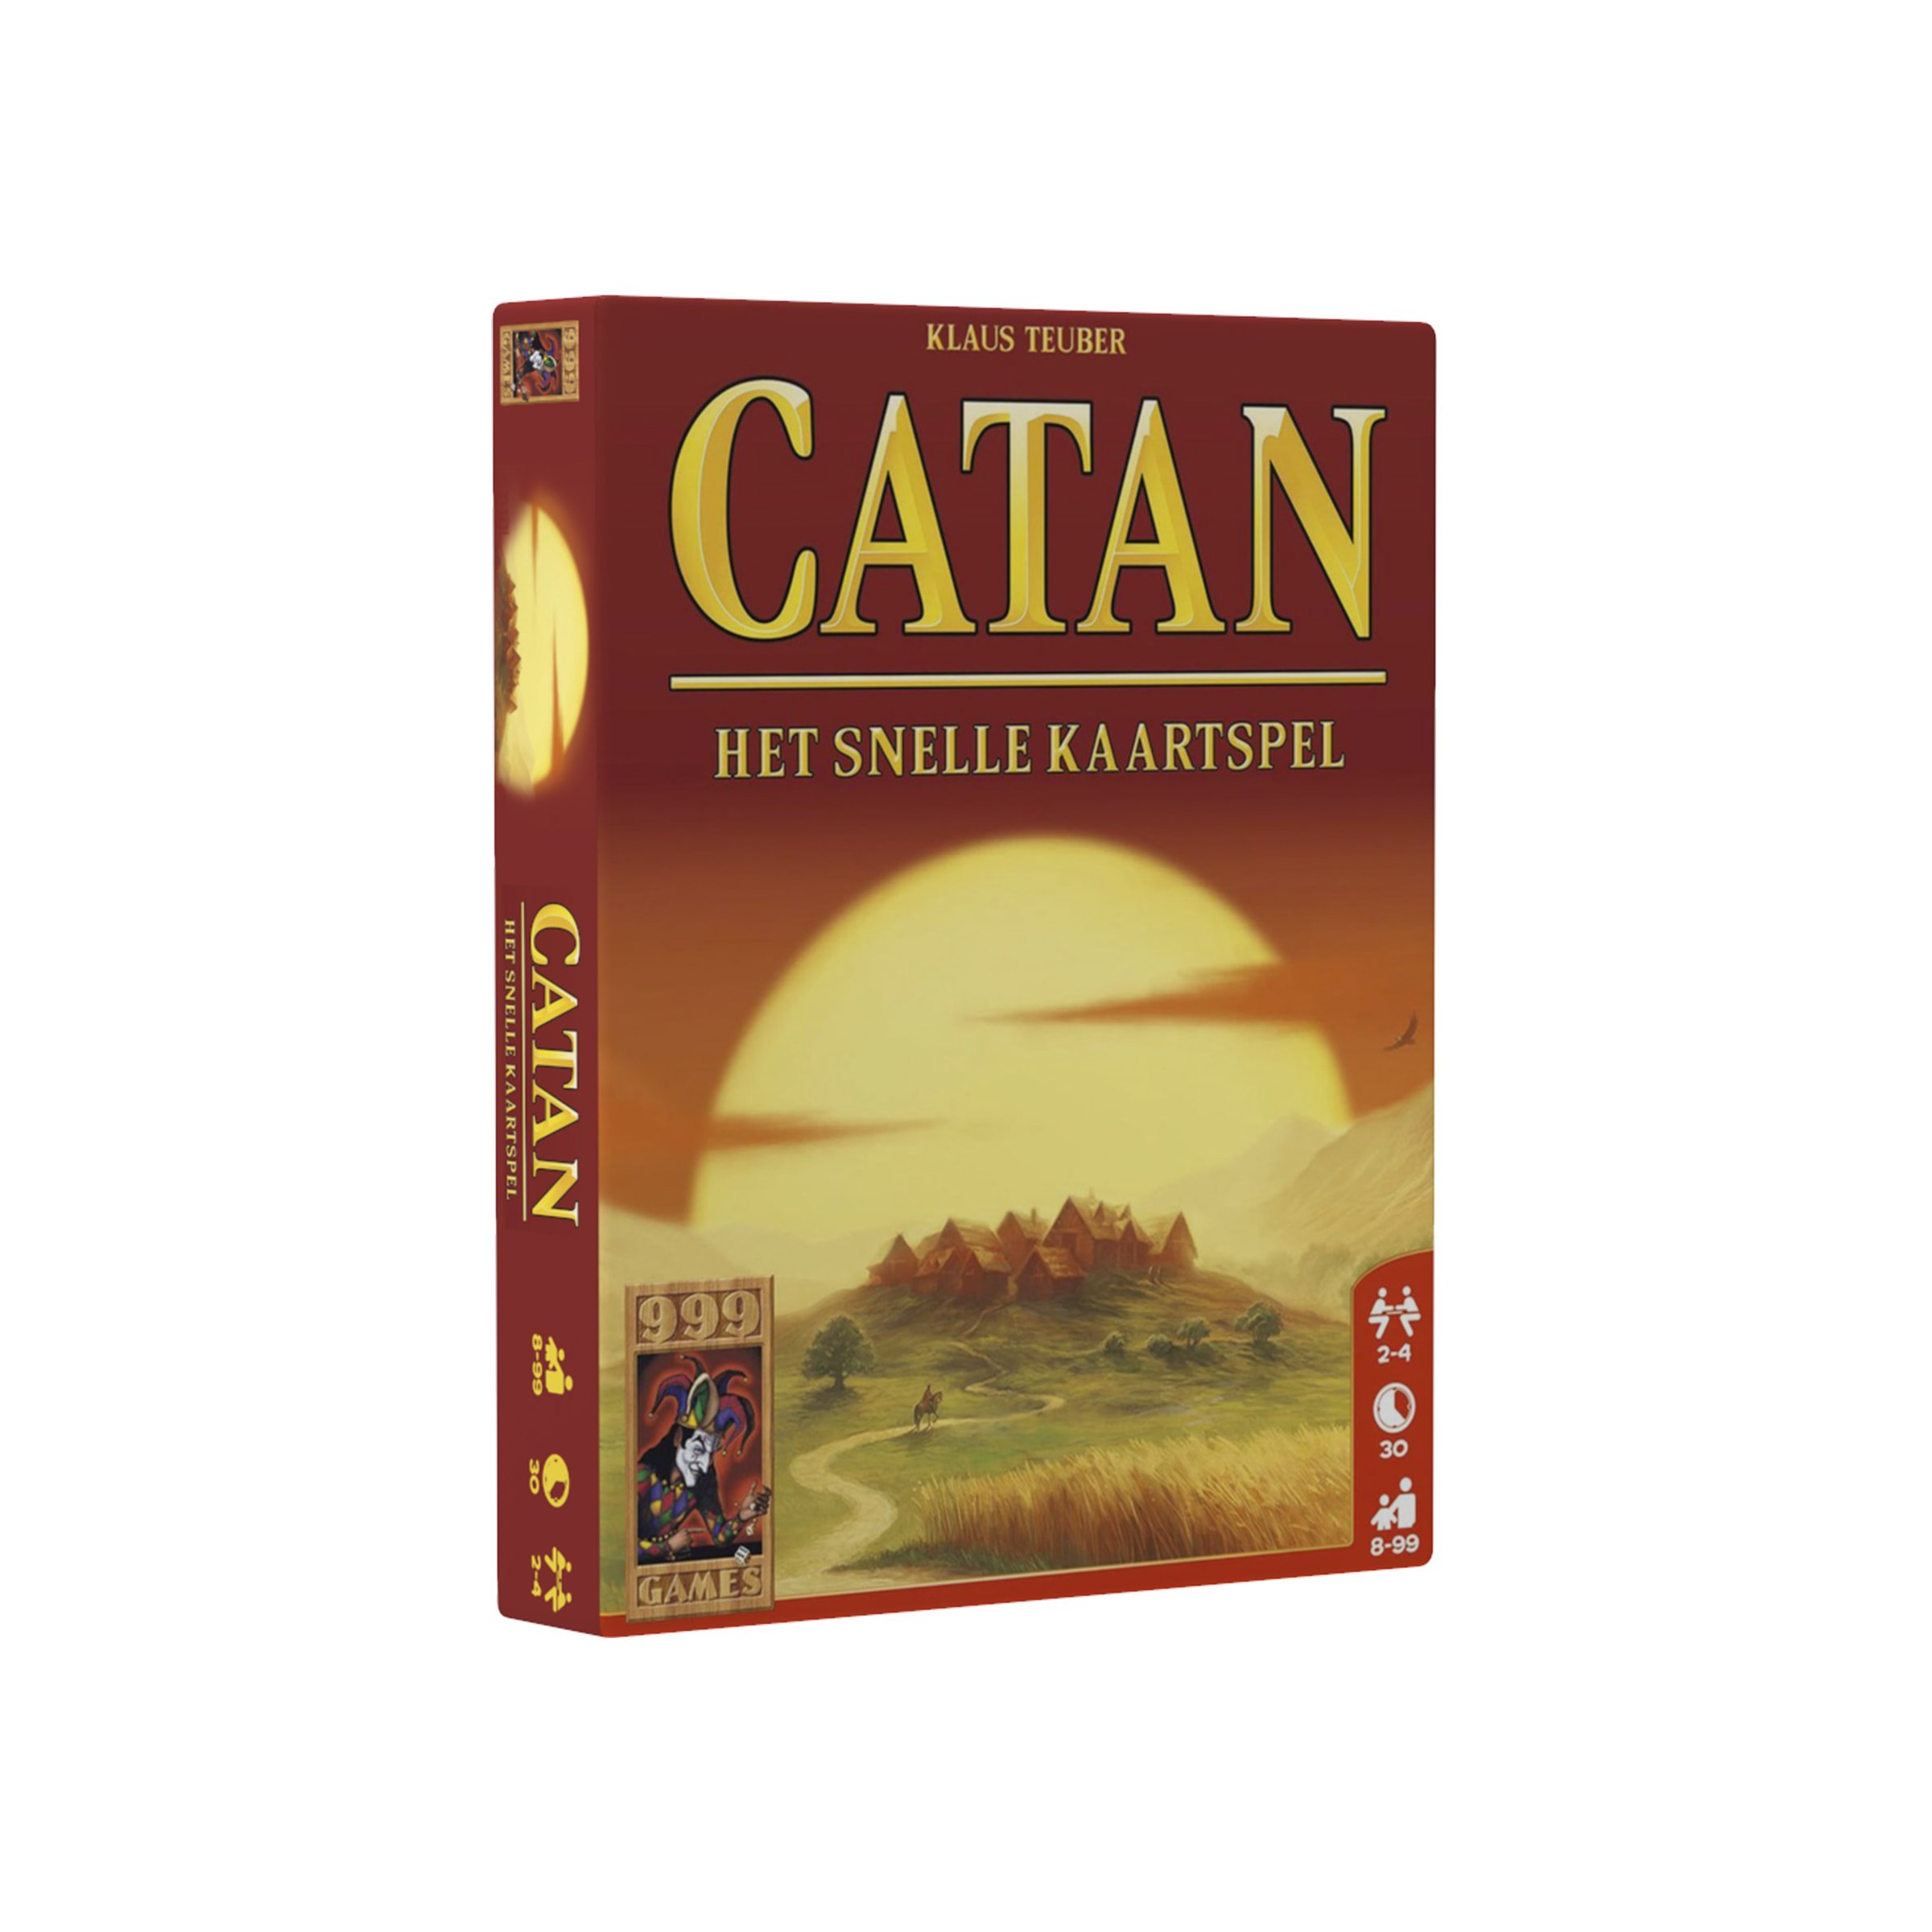 Settlers of catan card game